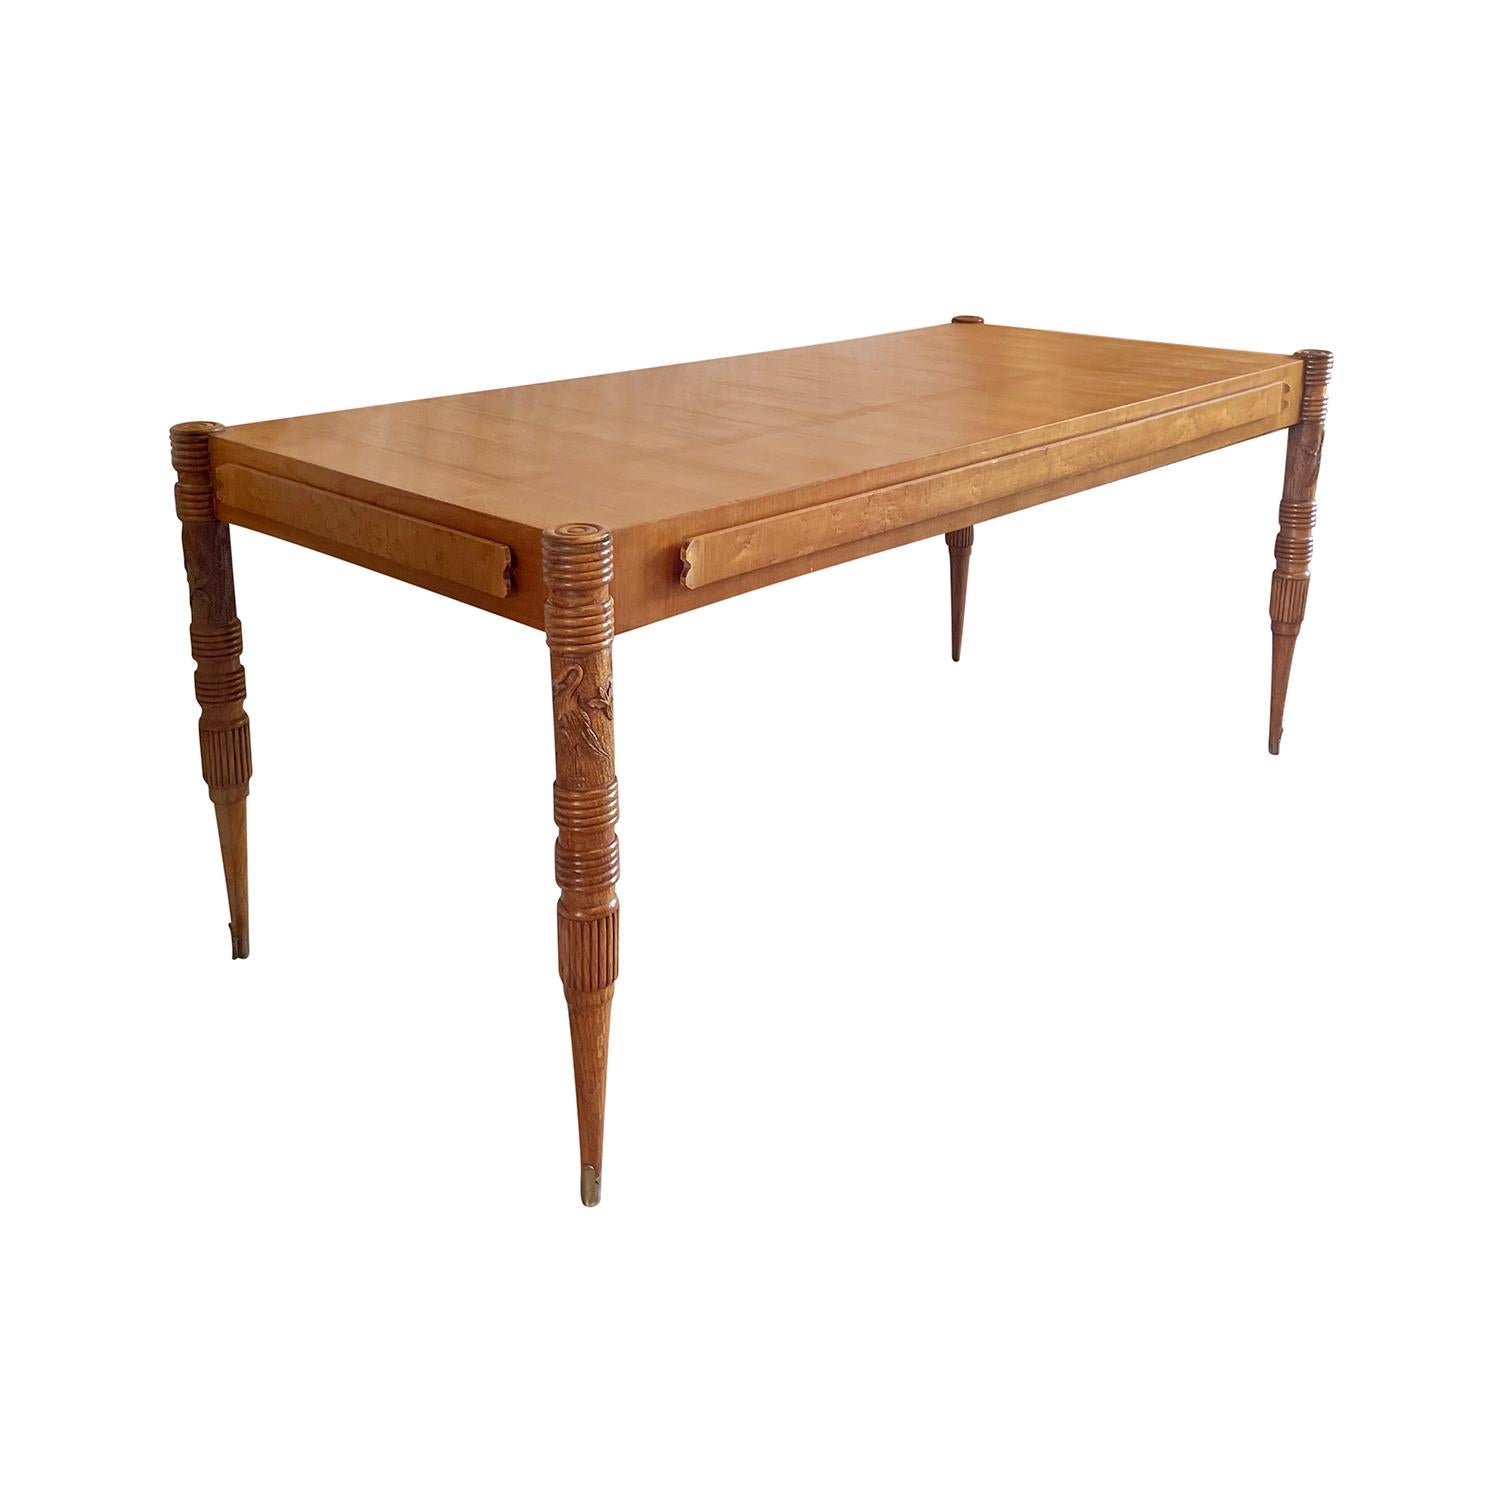 Hand-Carved 20th Century Italian Vintage Ashwood Dining Room Table by Pier Luigi Colli For Sale